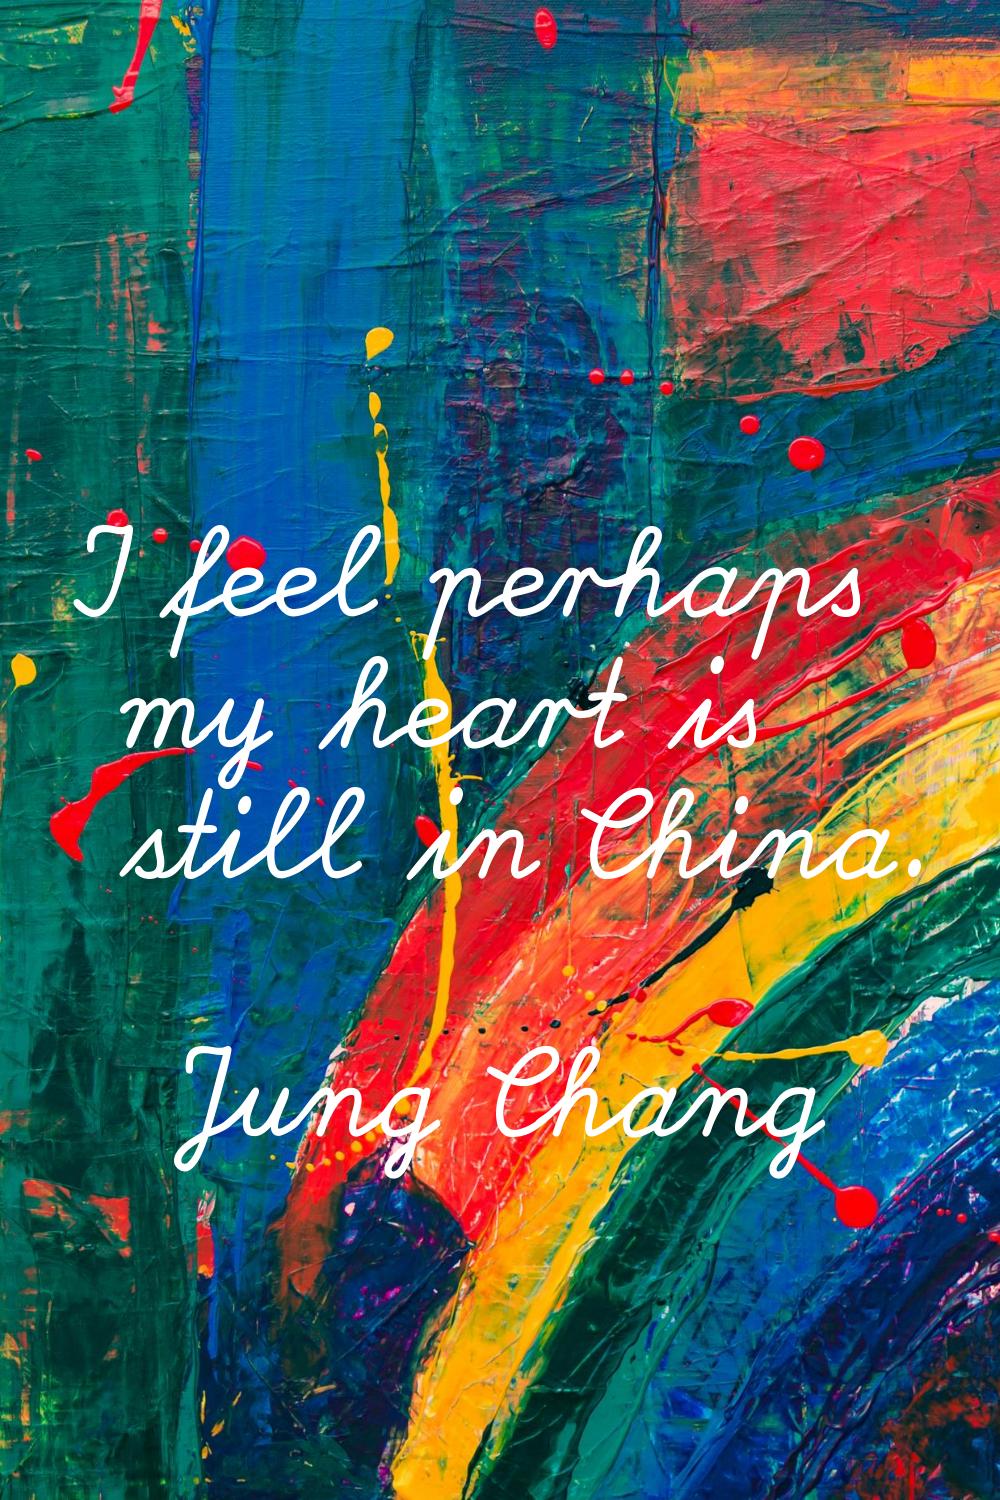 I feel perhaps my heart is still in China.